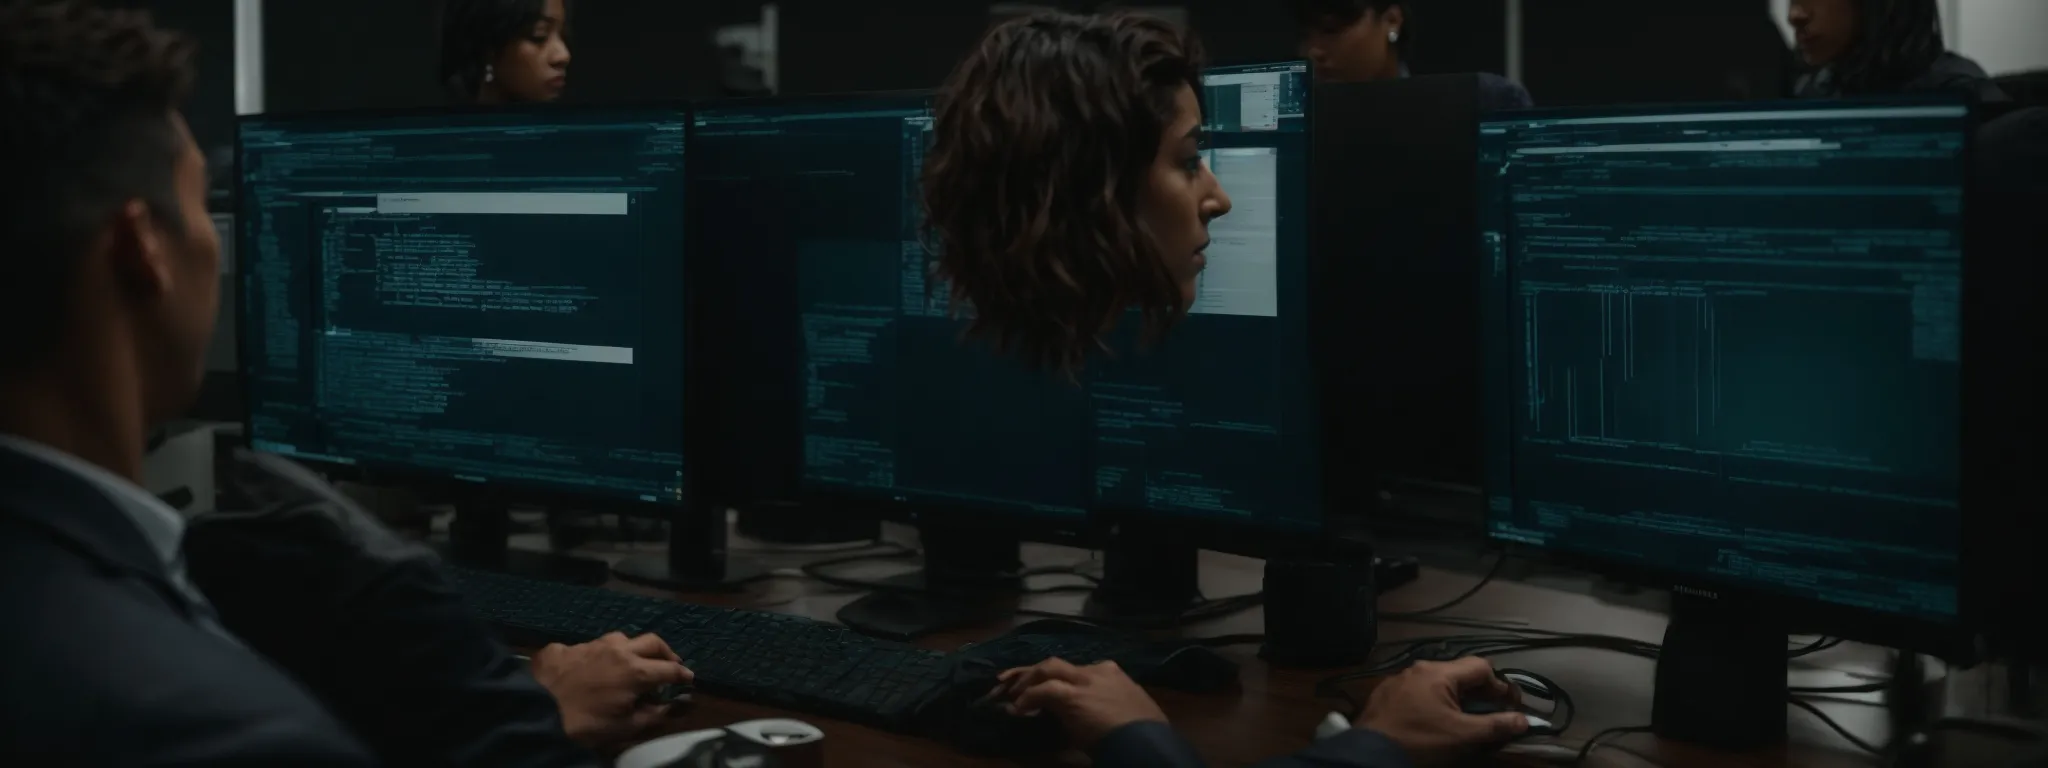 a diverse group of professionals examines code on a large computer screen in a modern office setting.